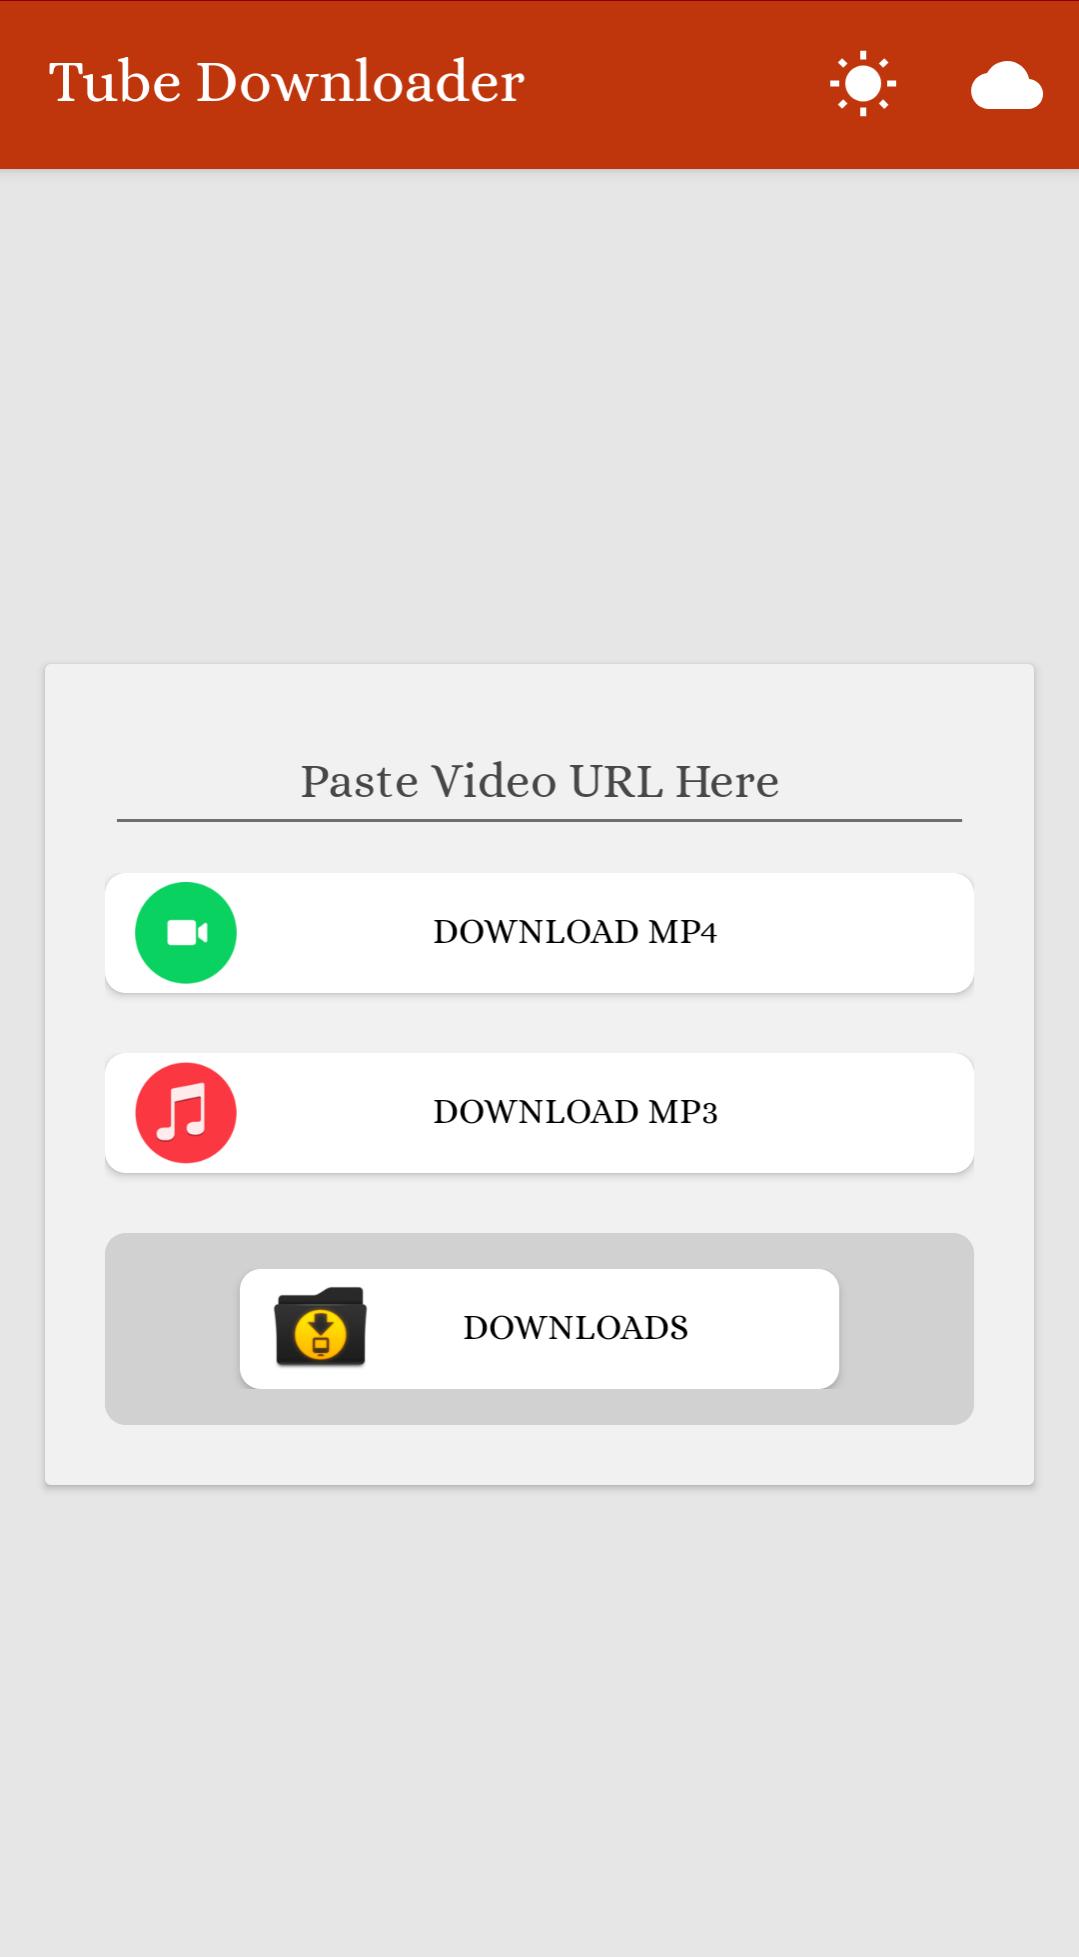 You MP3 - MP4 Tube Music & Video Downloader for Android - APK Download